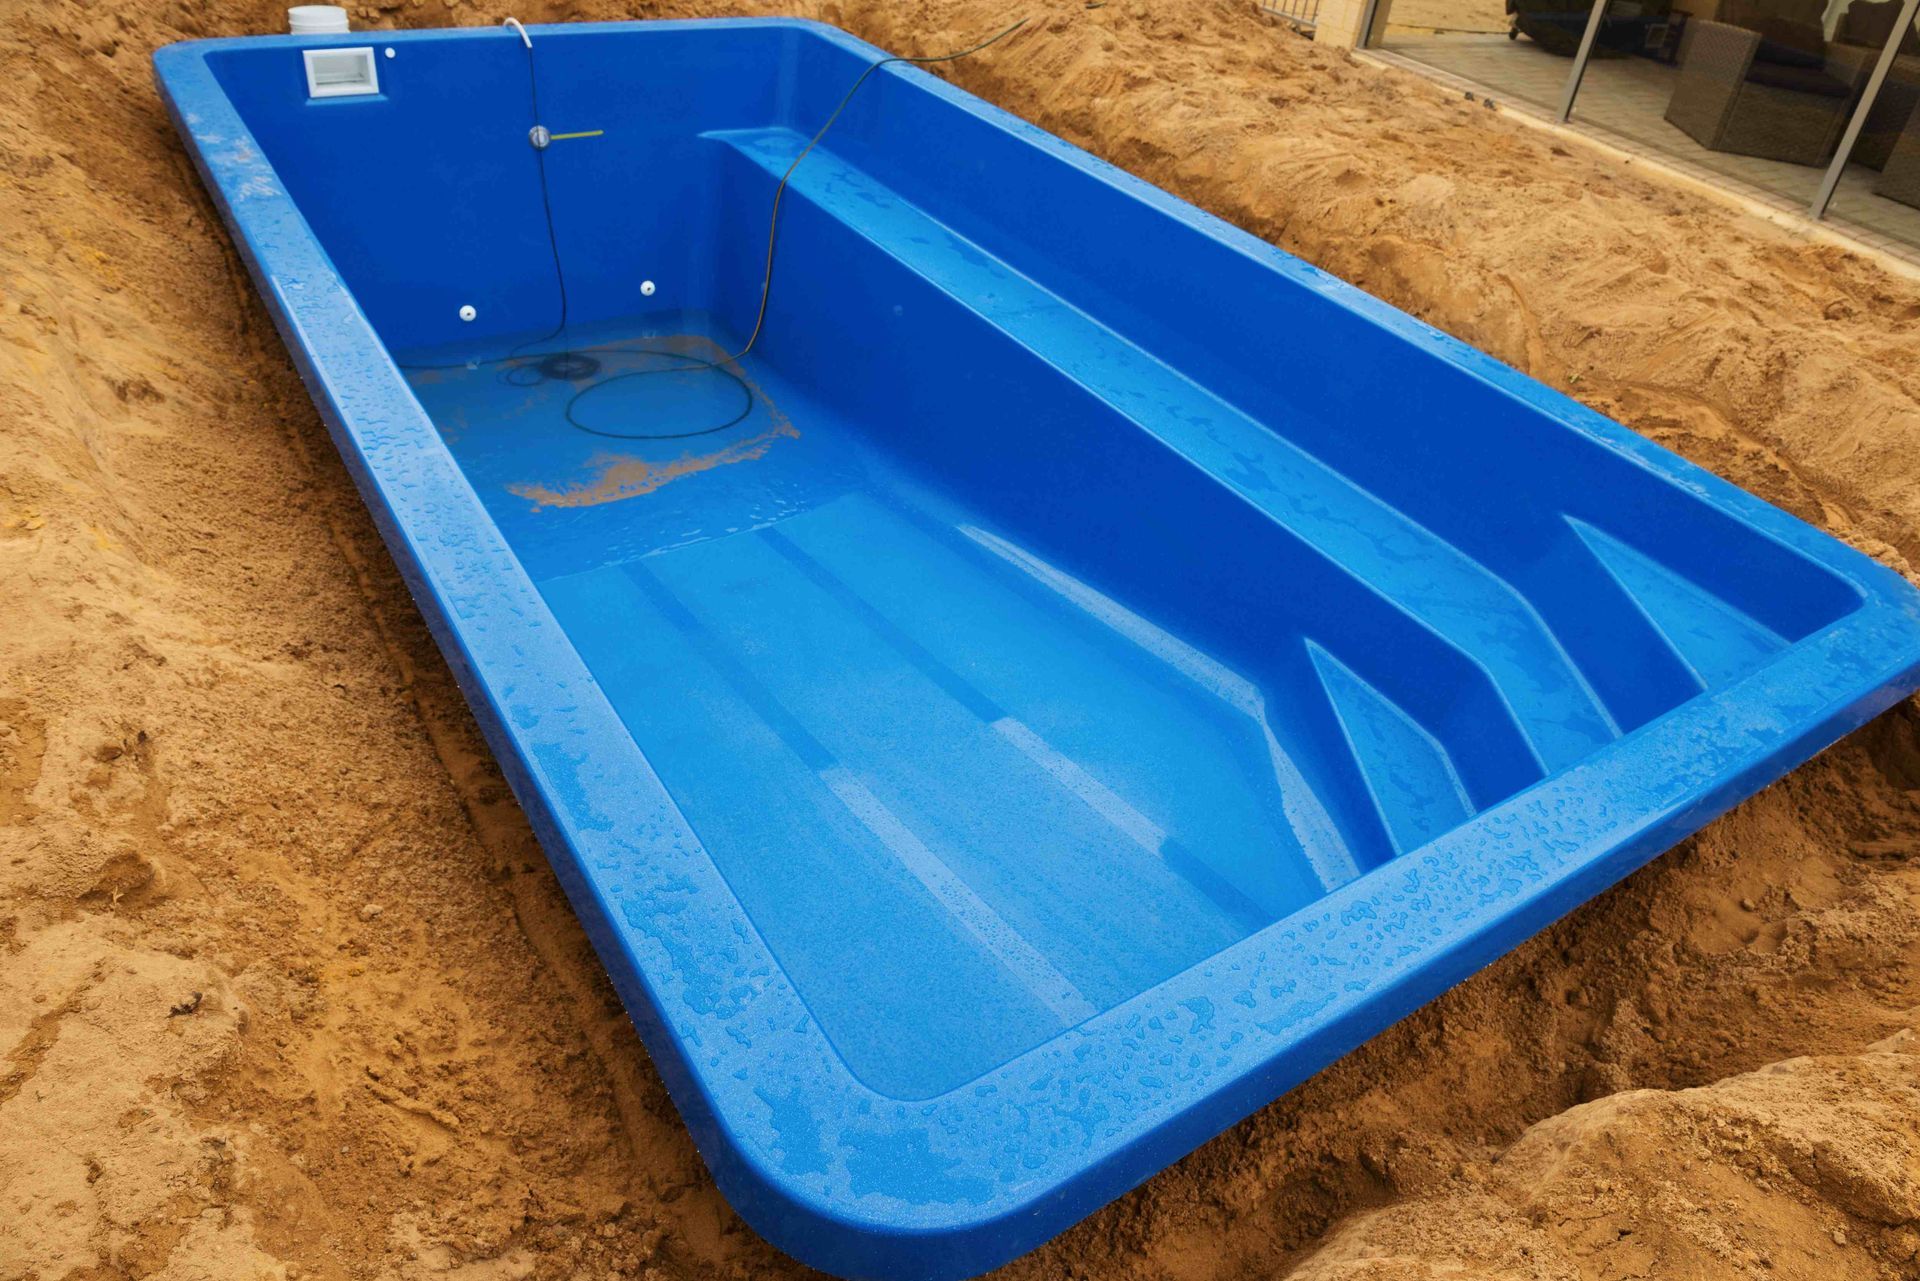 A fiberglass pool halfway installed in the ground